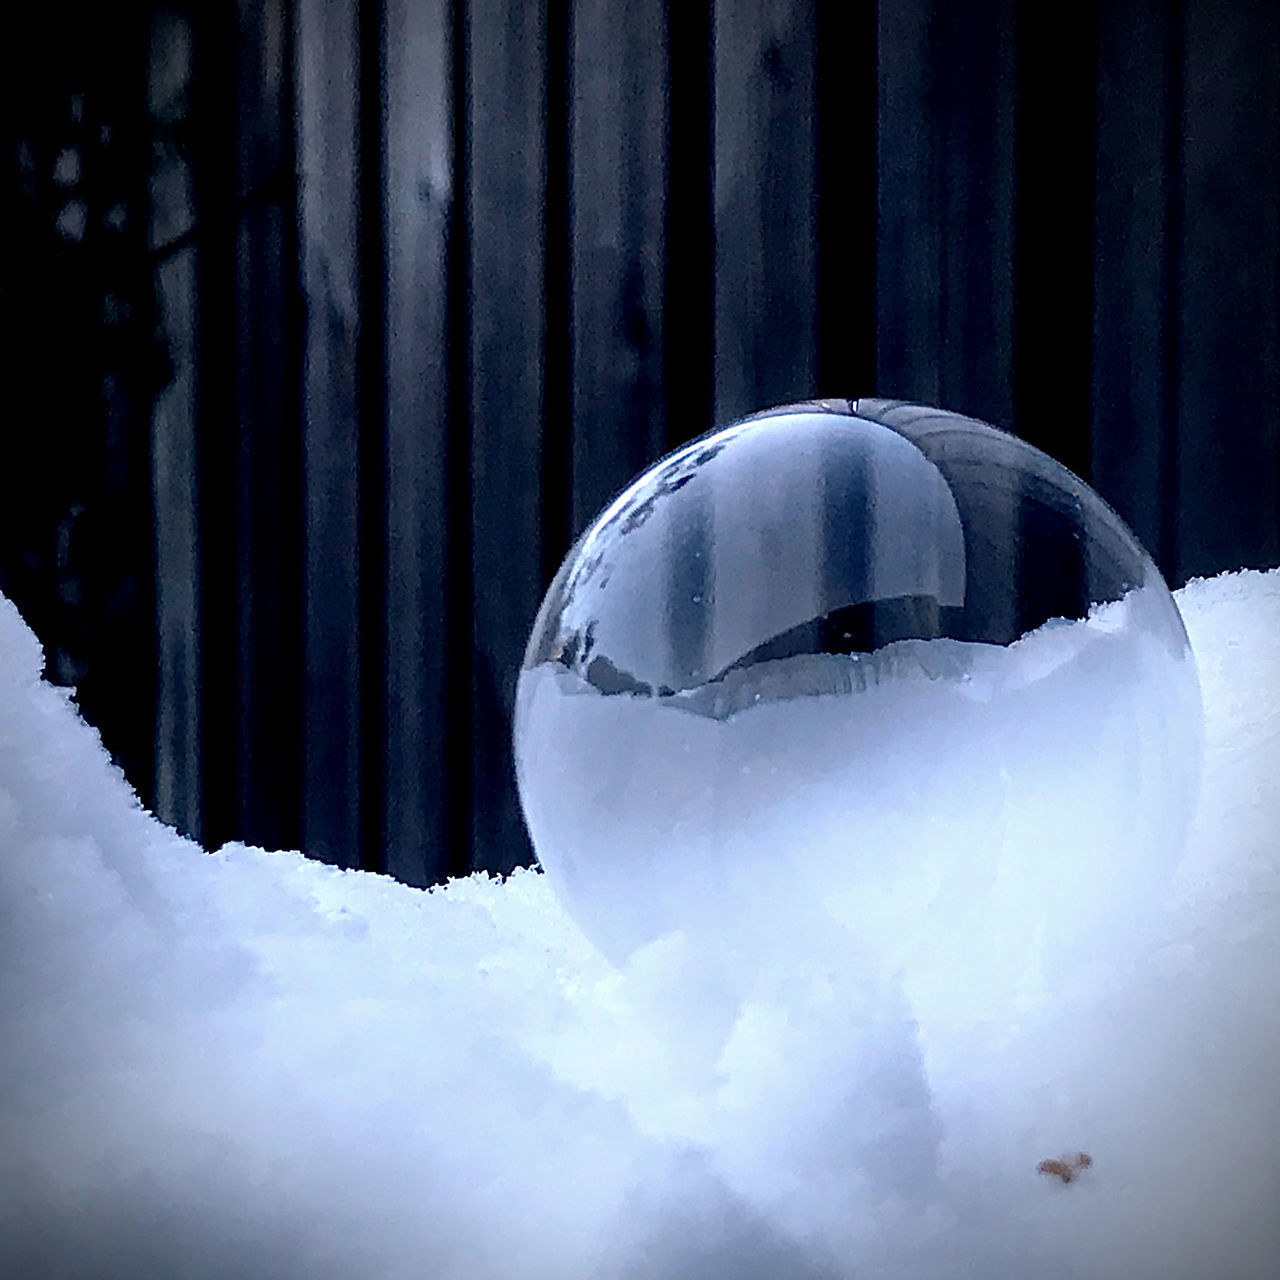 CLOSE-UP OF WHITE CRYSTAL BALL ON SNOW COVERED LAND